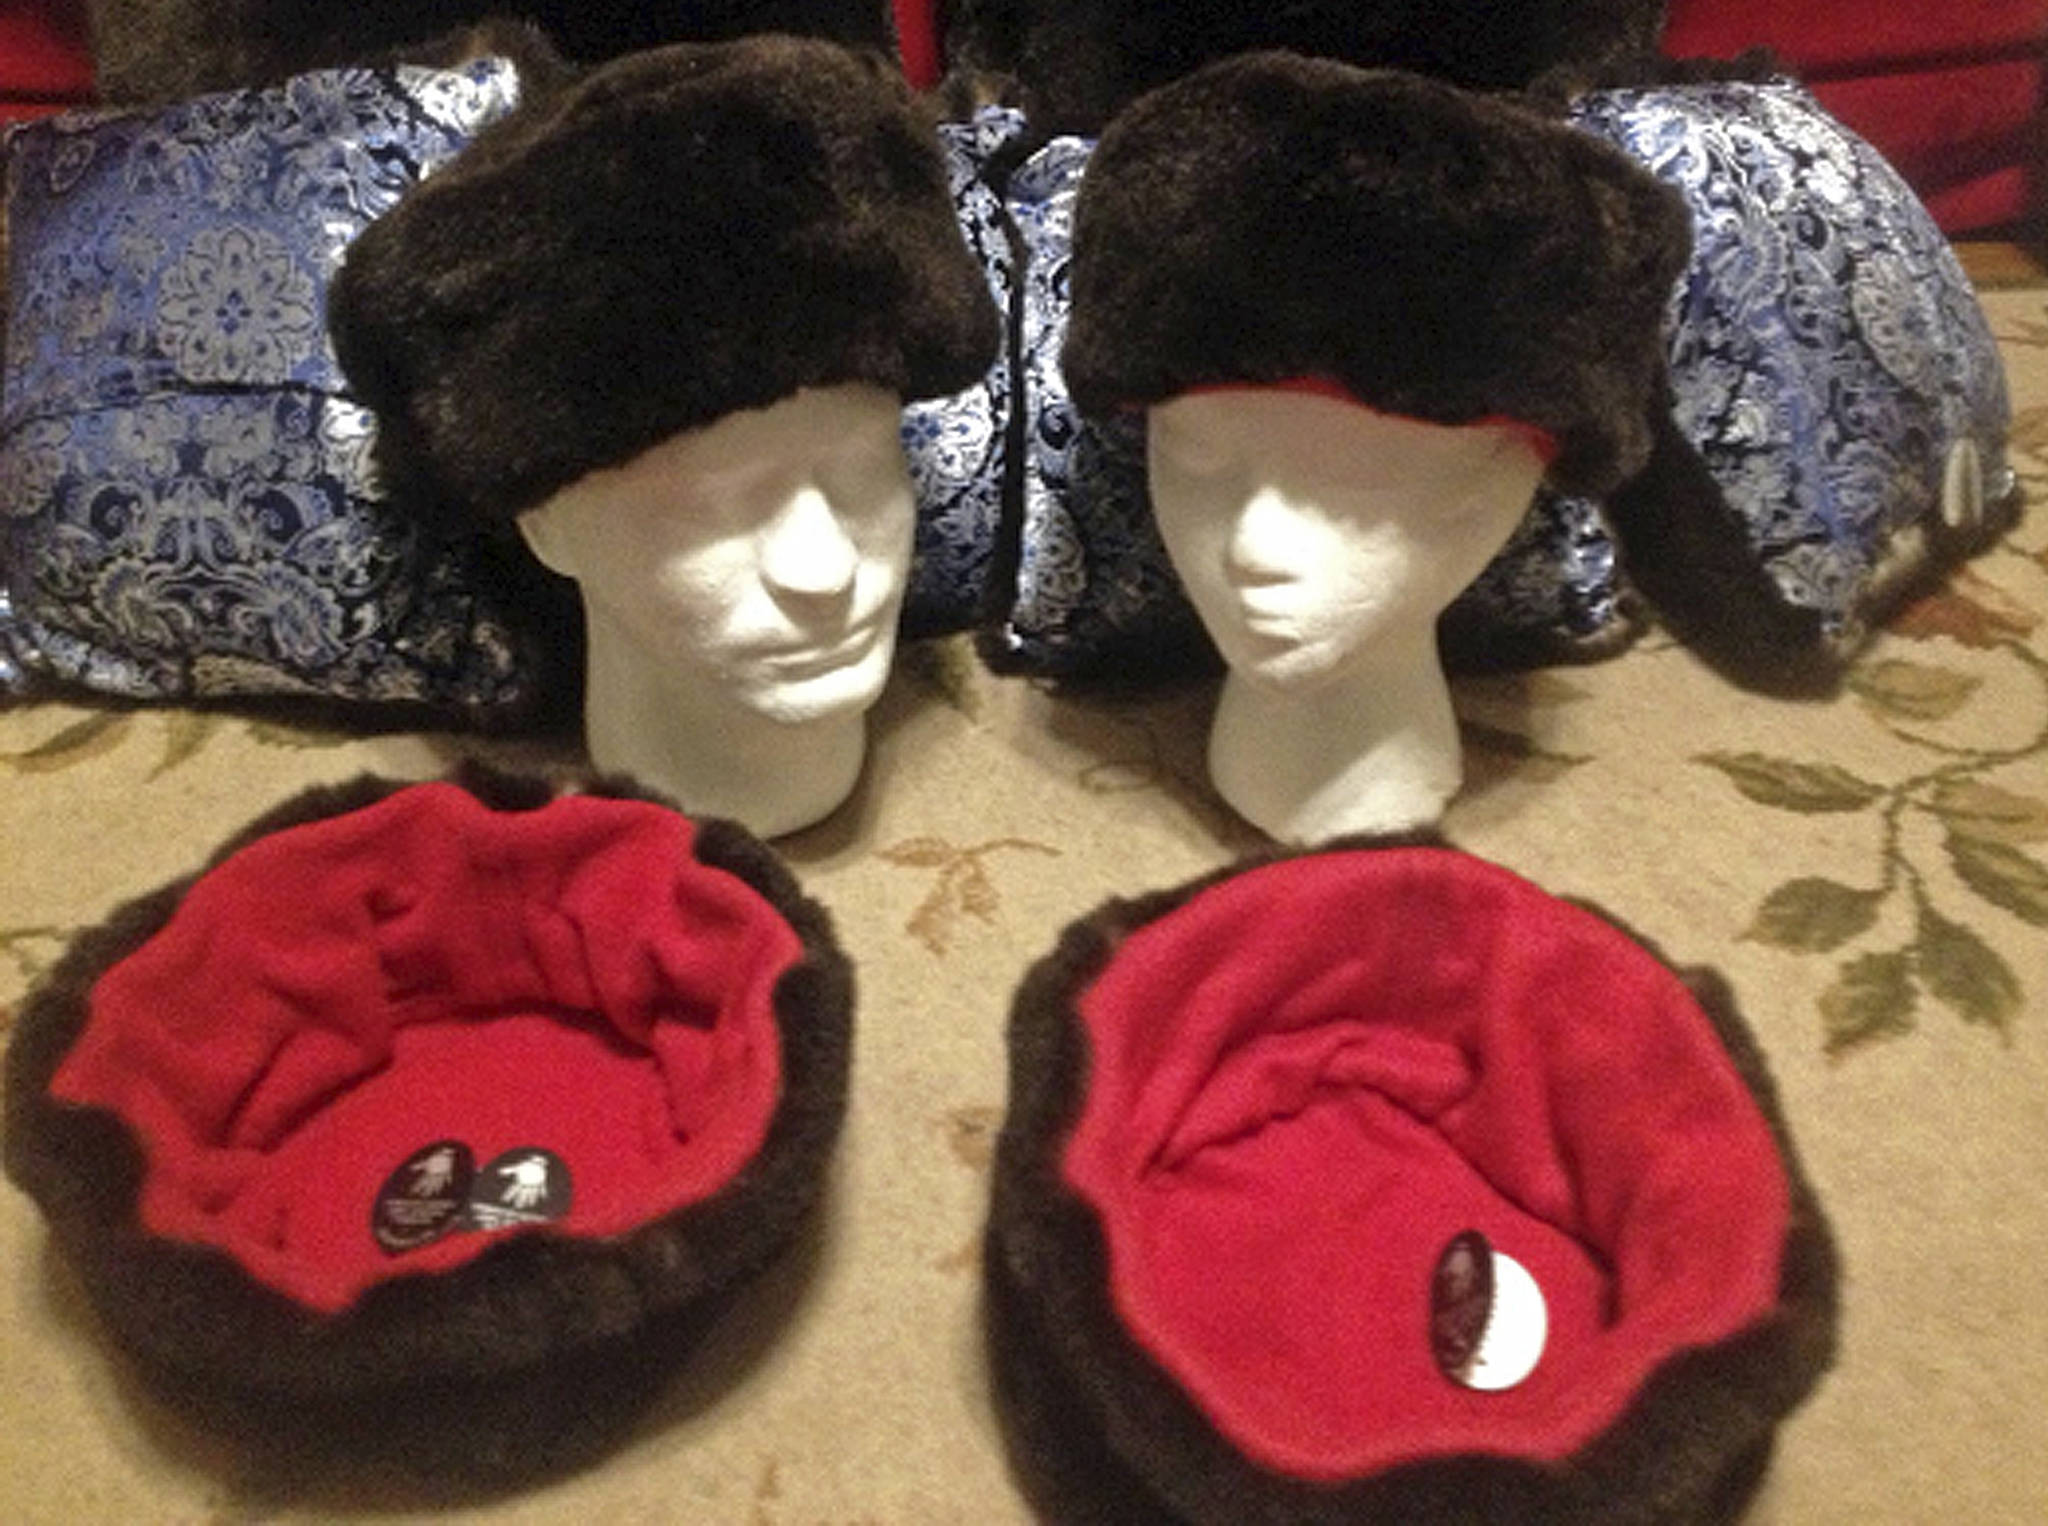 This undated file photo shows hats trimmed with sea otter fur, offered by Alaska Native Marcus Gho’s Tuvraqtuq online retail store based in Juneau. (Marcus Gho via AP, file)